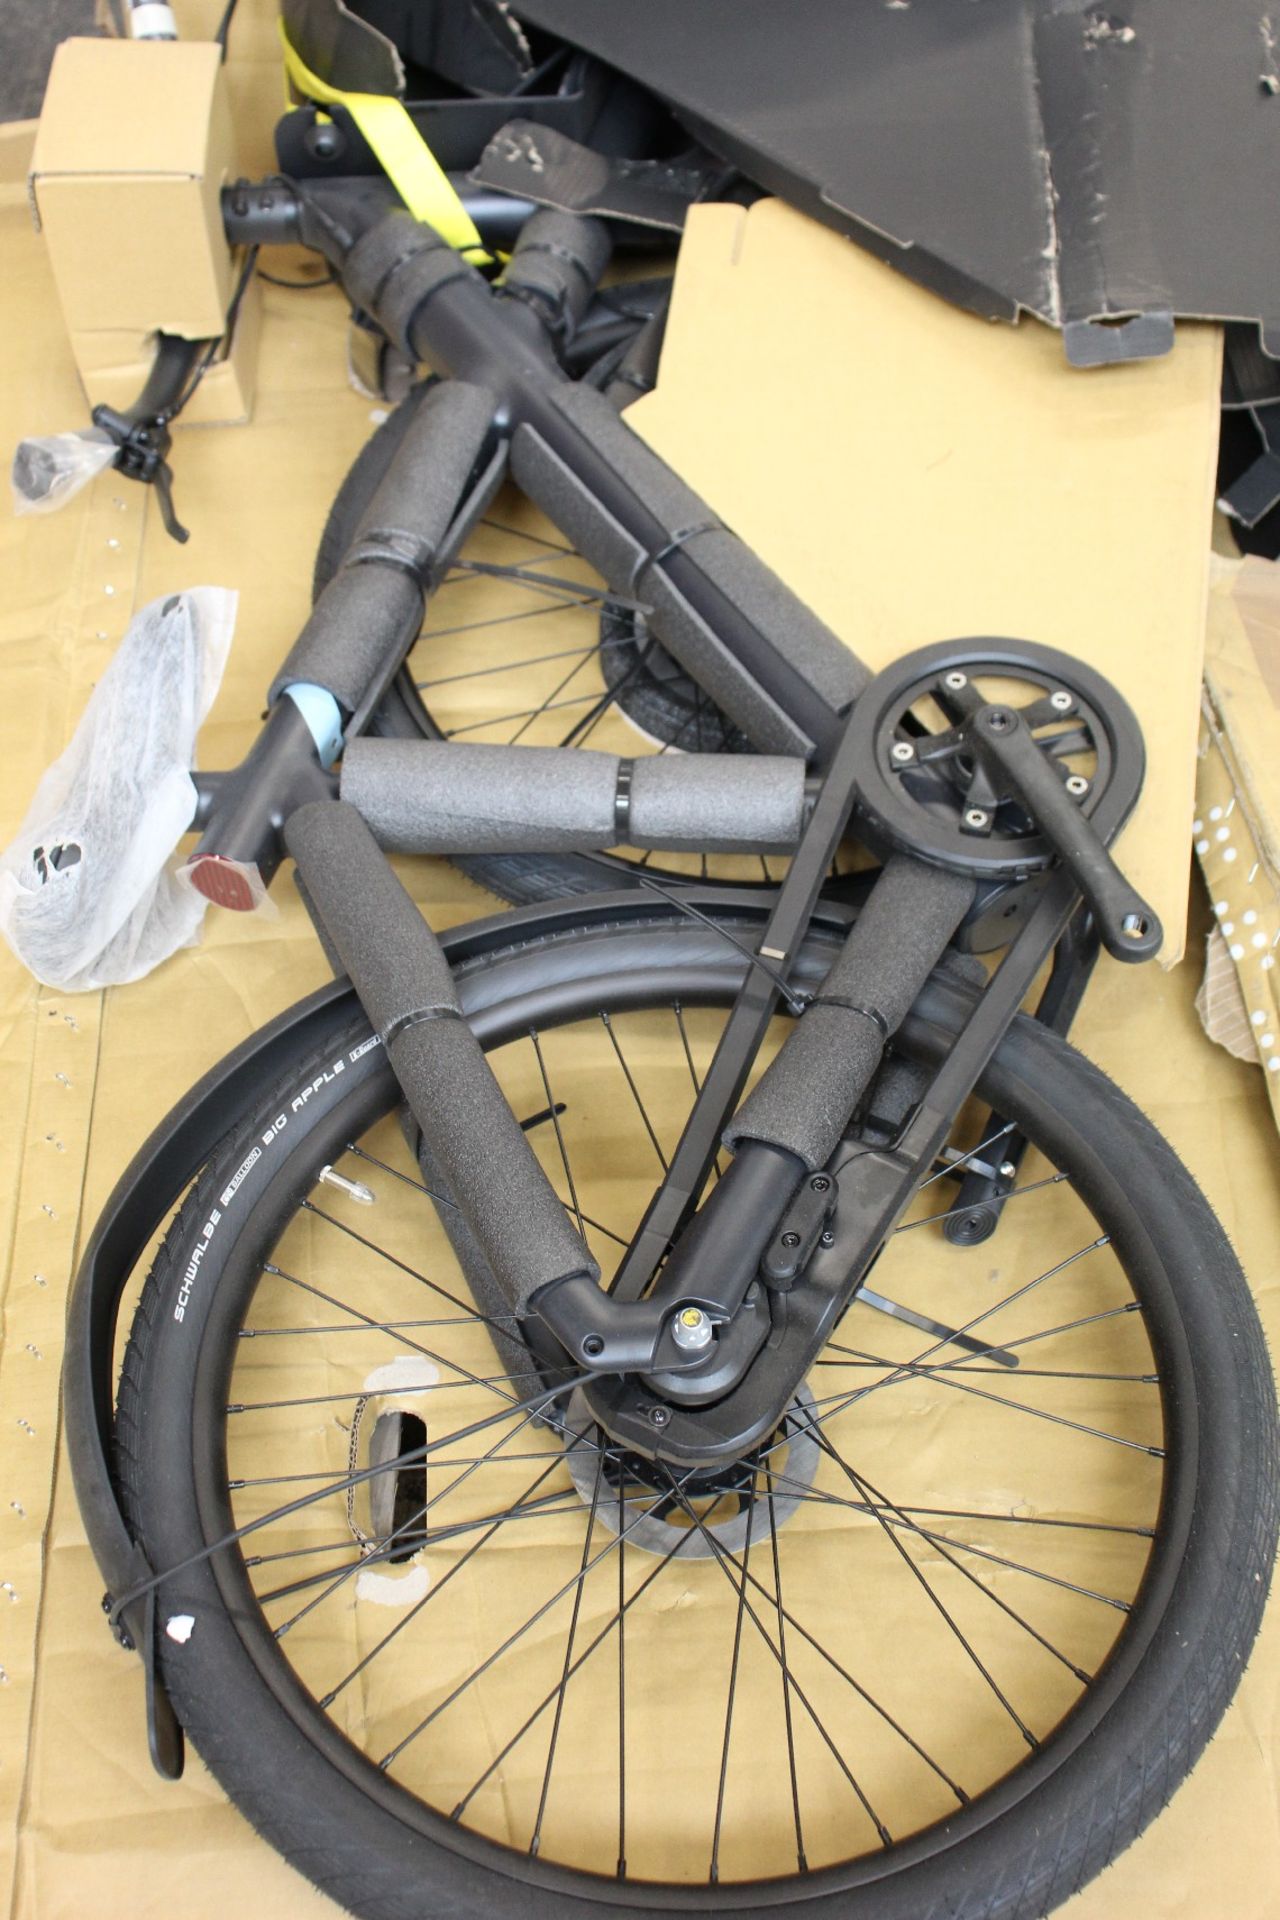 A VanMoof X3 Dark Electric Bike (Note: Item may be incomplete, viewing is recommended).